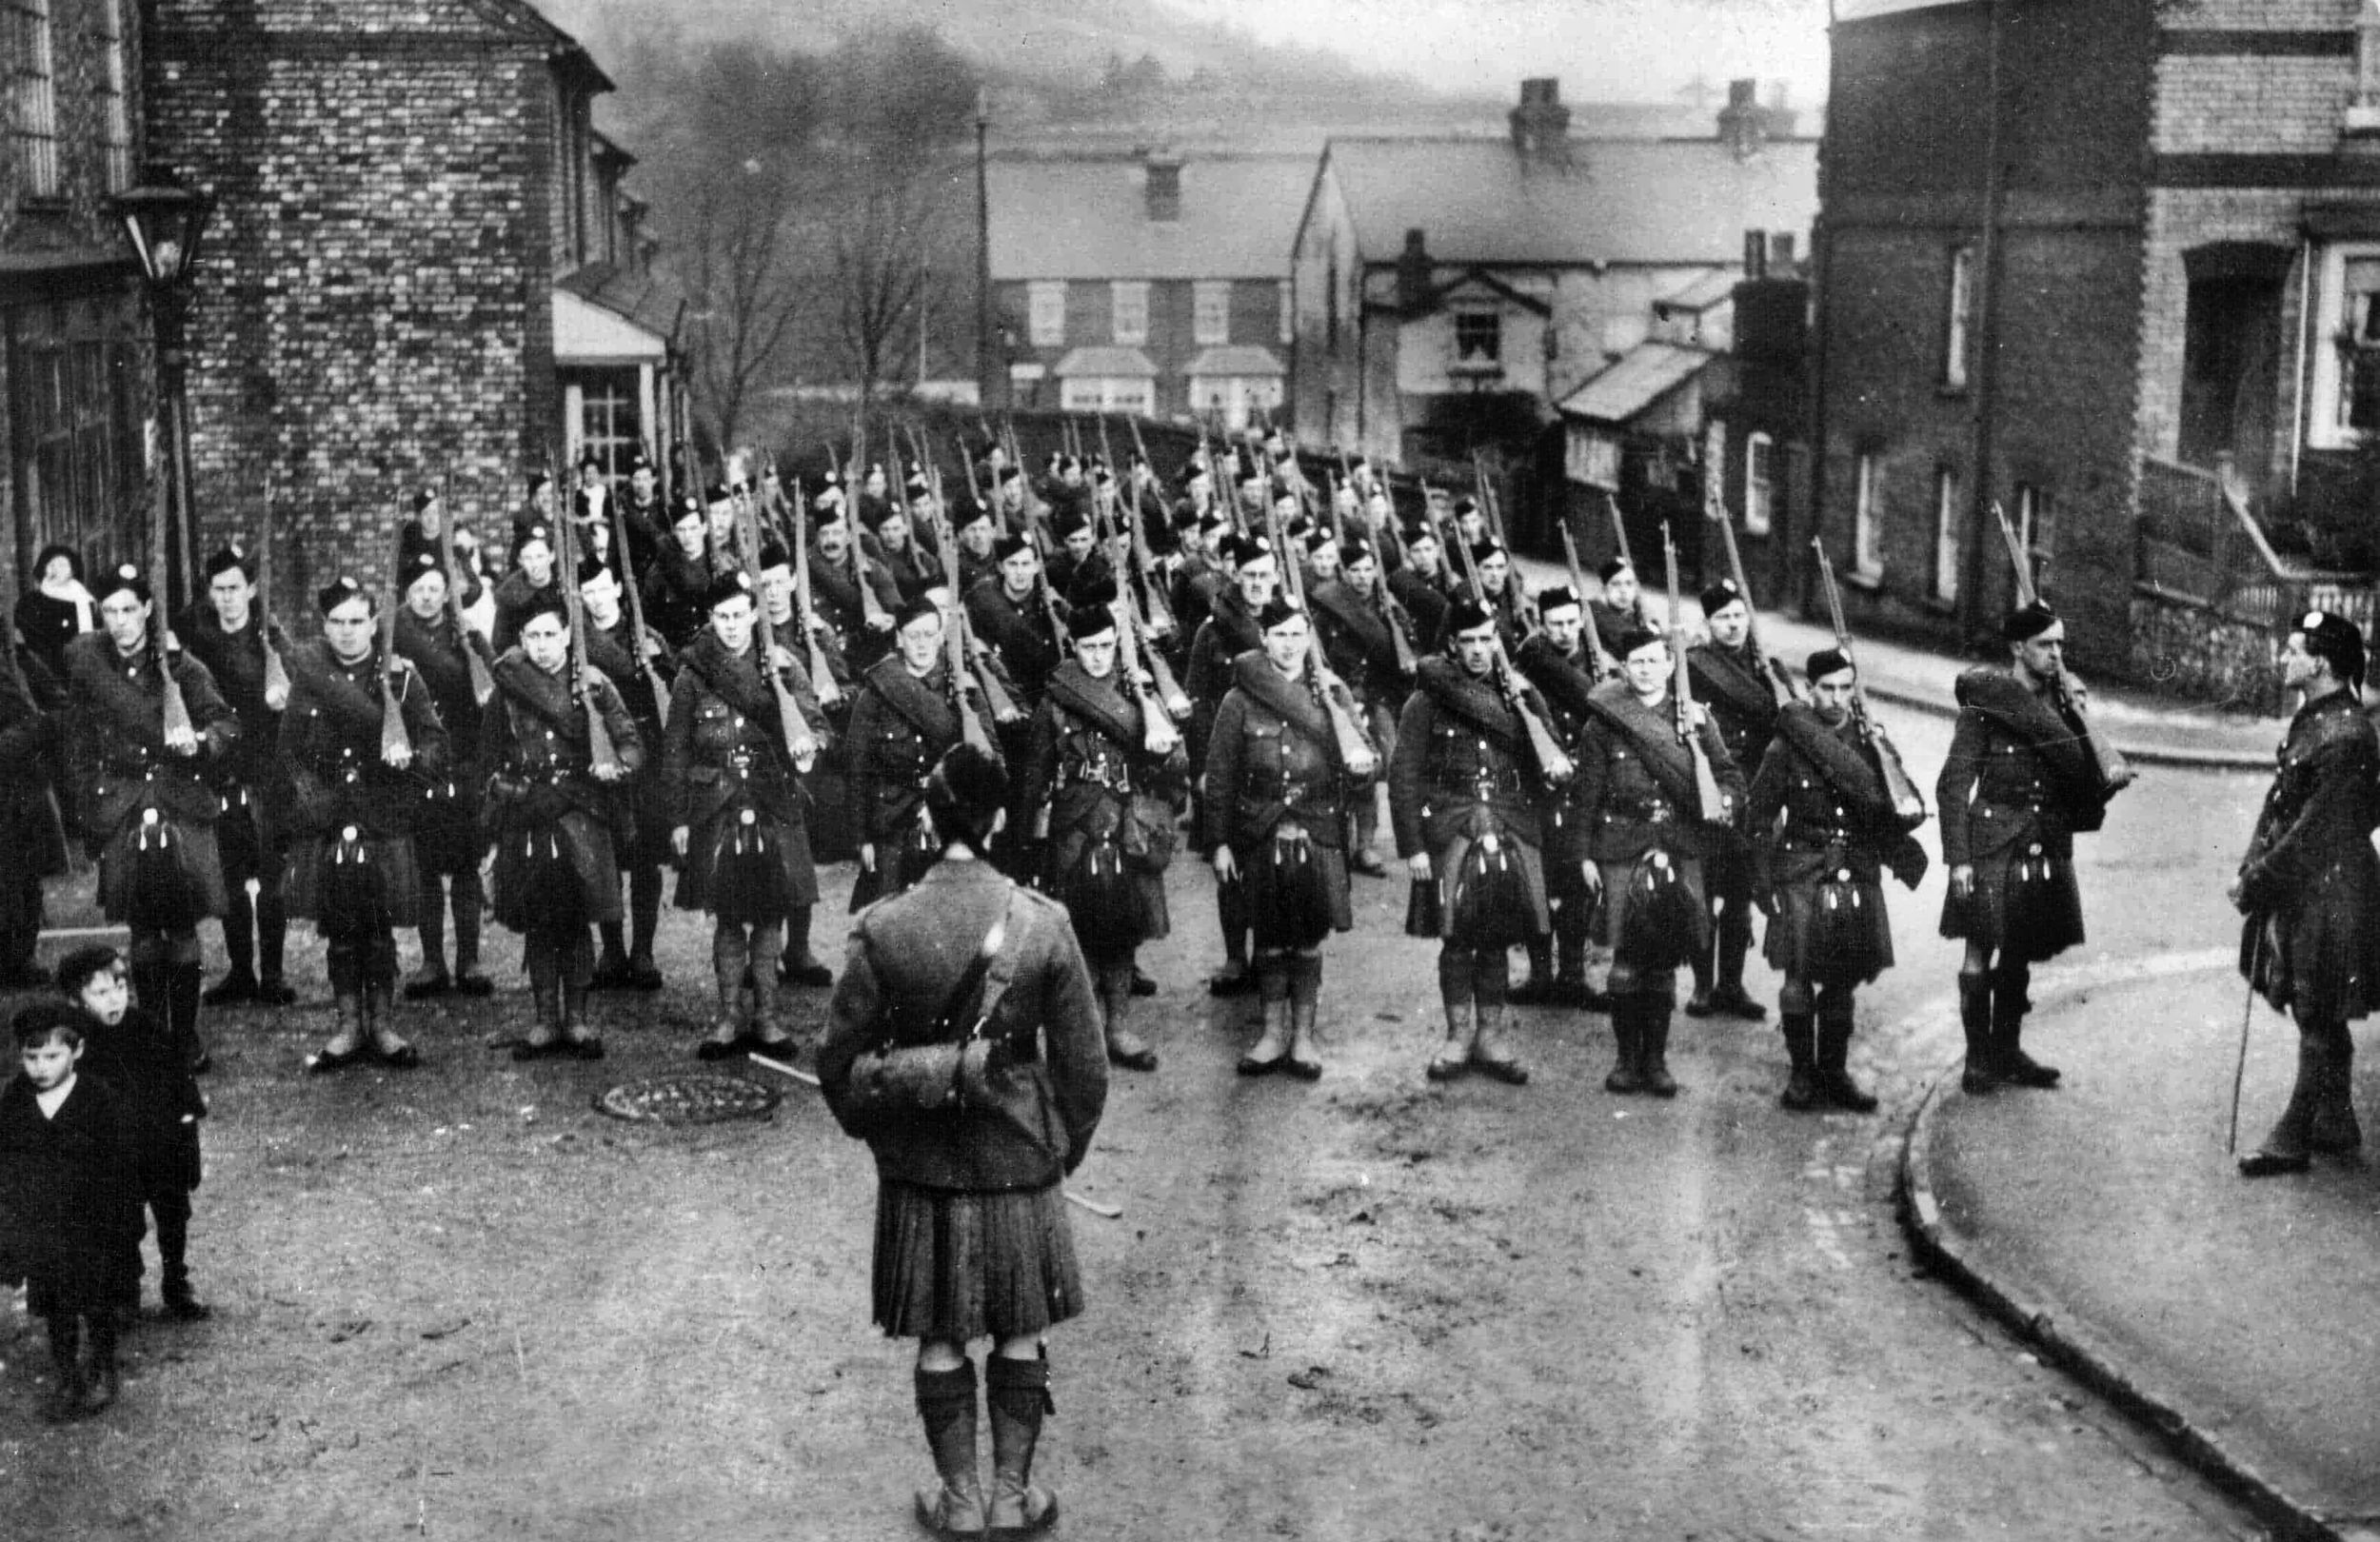 A company from a Scottish Regiment parade in Dorking, south of London, prior to embarking for France. Despite severe losses during repeated offensives in 1914 and 1915, Britain was able to successfully enlist troops into the “New Army.”